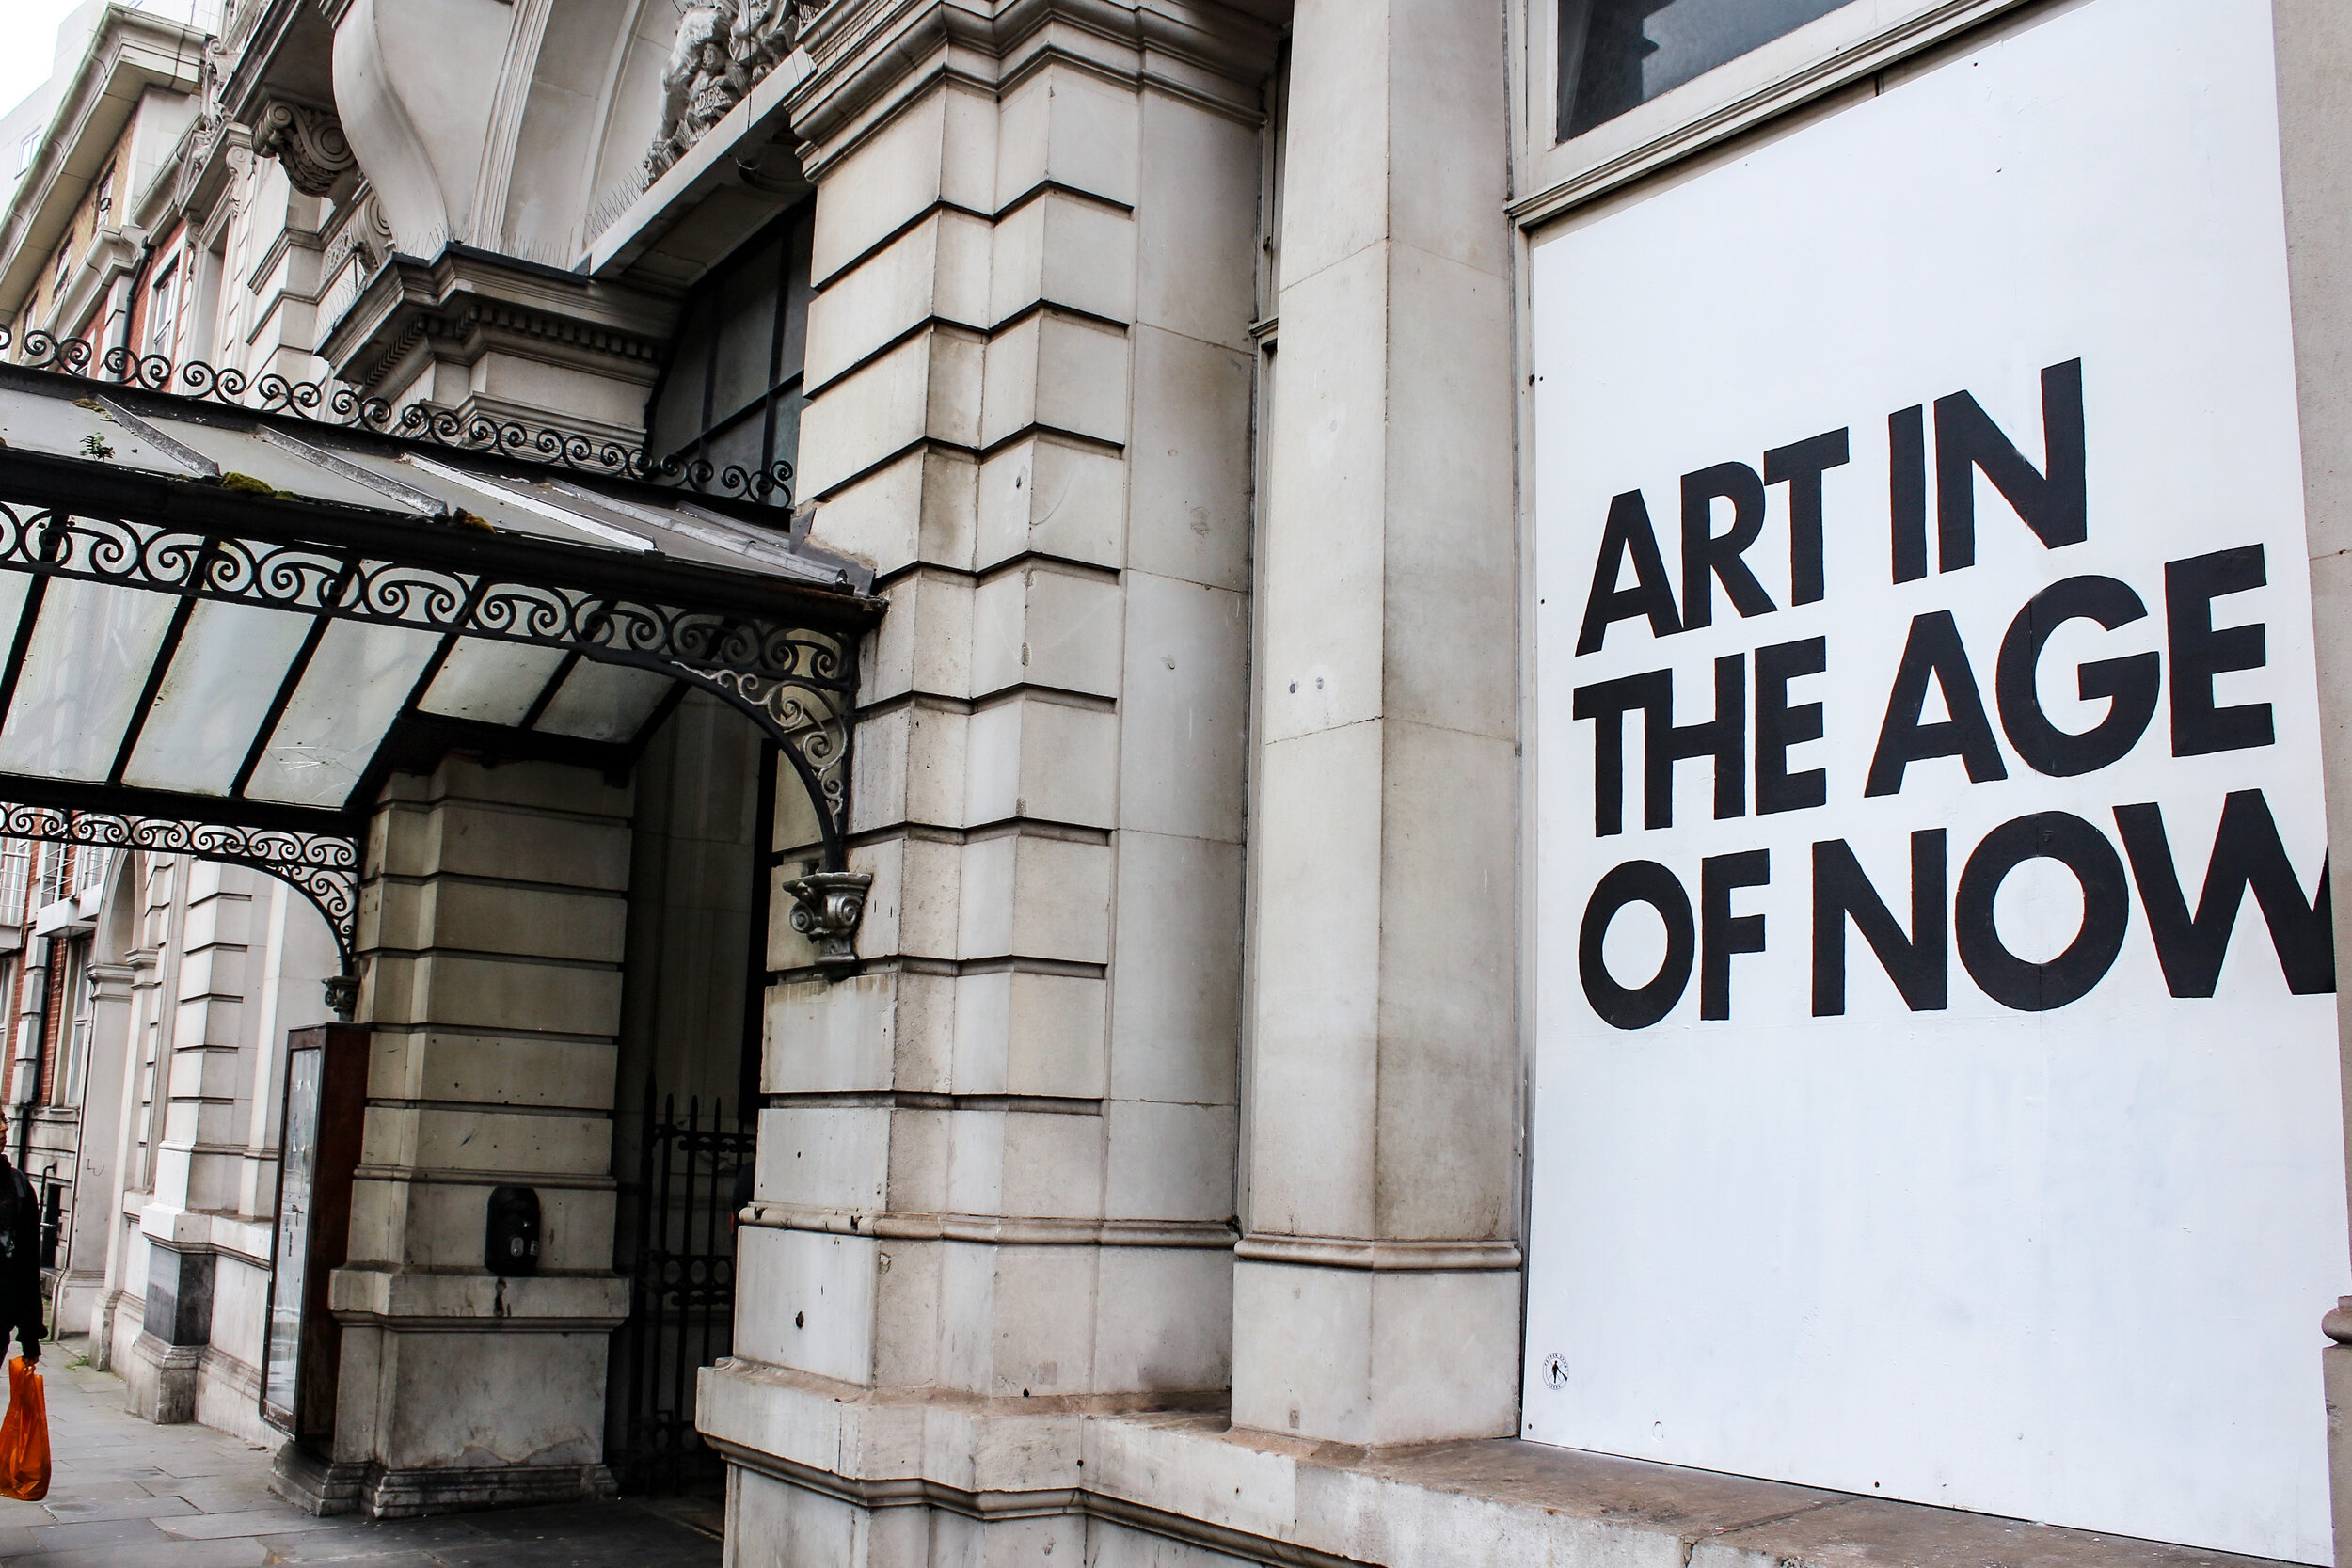 Art in the Age of Now is on until 6 June 2021 in Fulham Town Hall, London